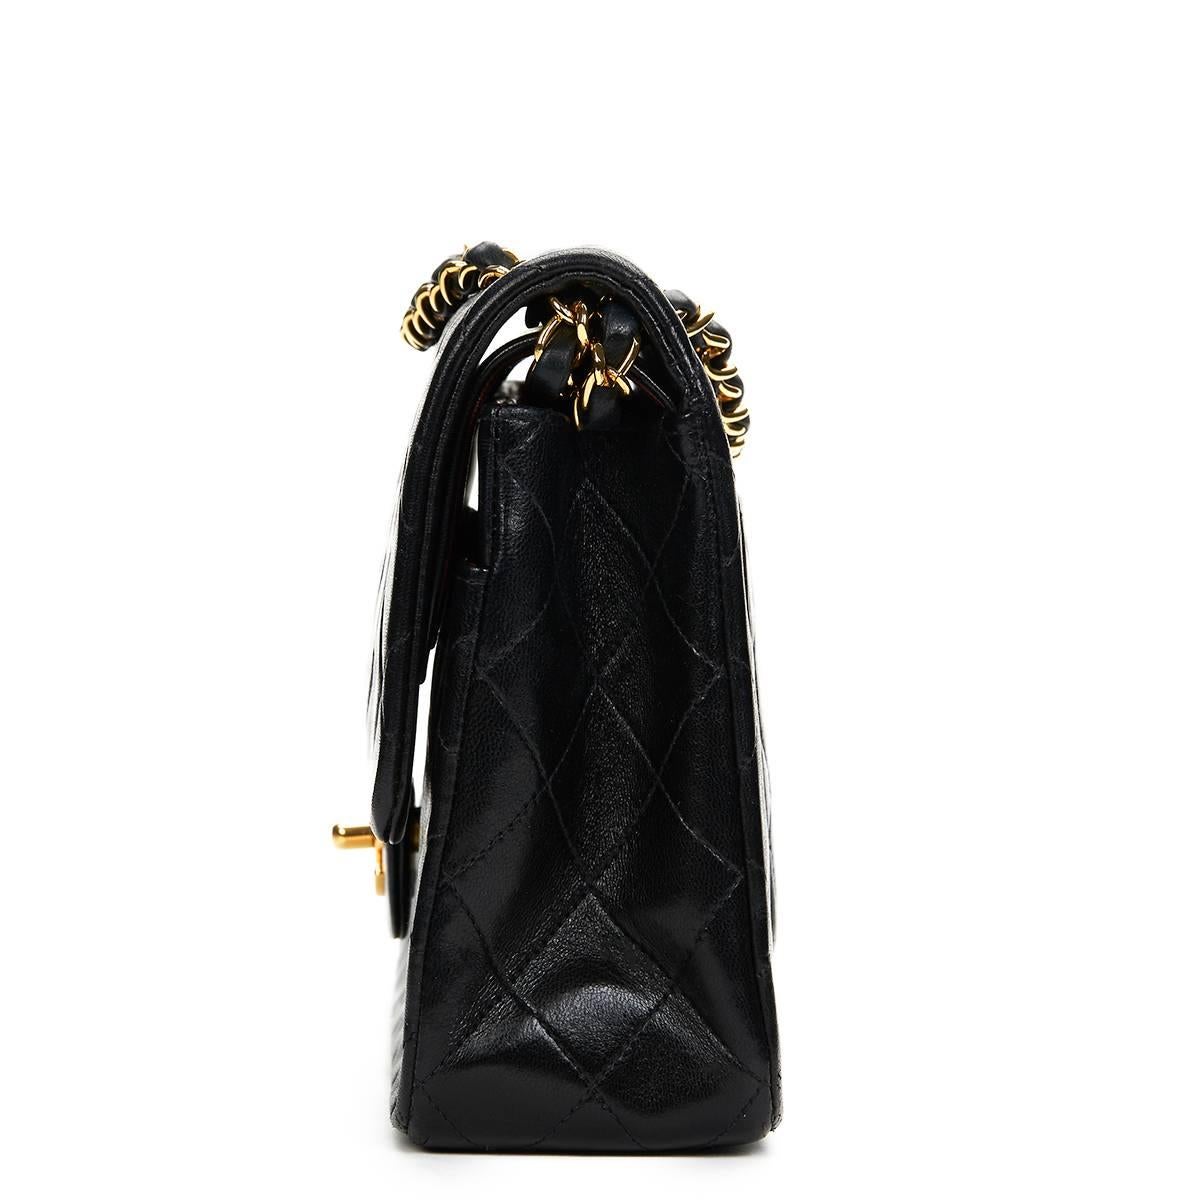 CHANEL
Black Quilted Lambskin Vintage Medium Classic Double Flap Bag

This CHANEL Medium Classic Double Flap Bag is in Very Good Pre-Owned Condition accompanied by Chanel Box. Circa 1990. Primarily made from Lambskin Leather complimented by Gold